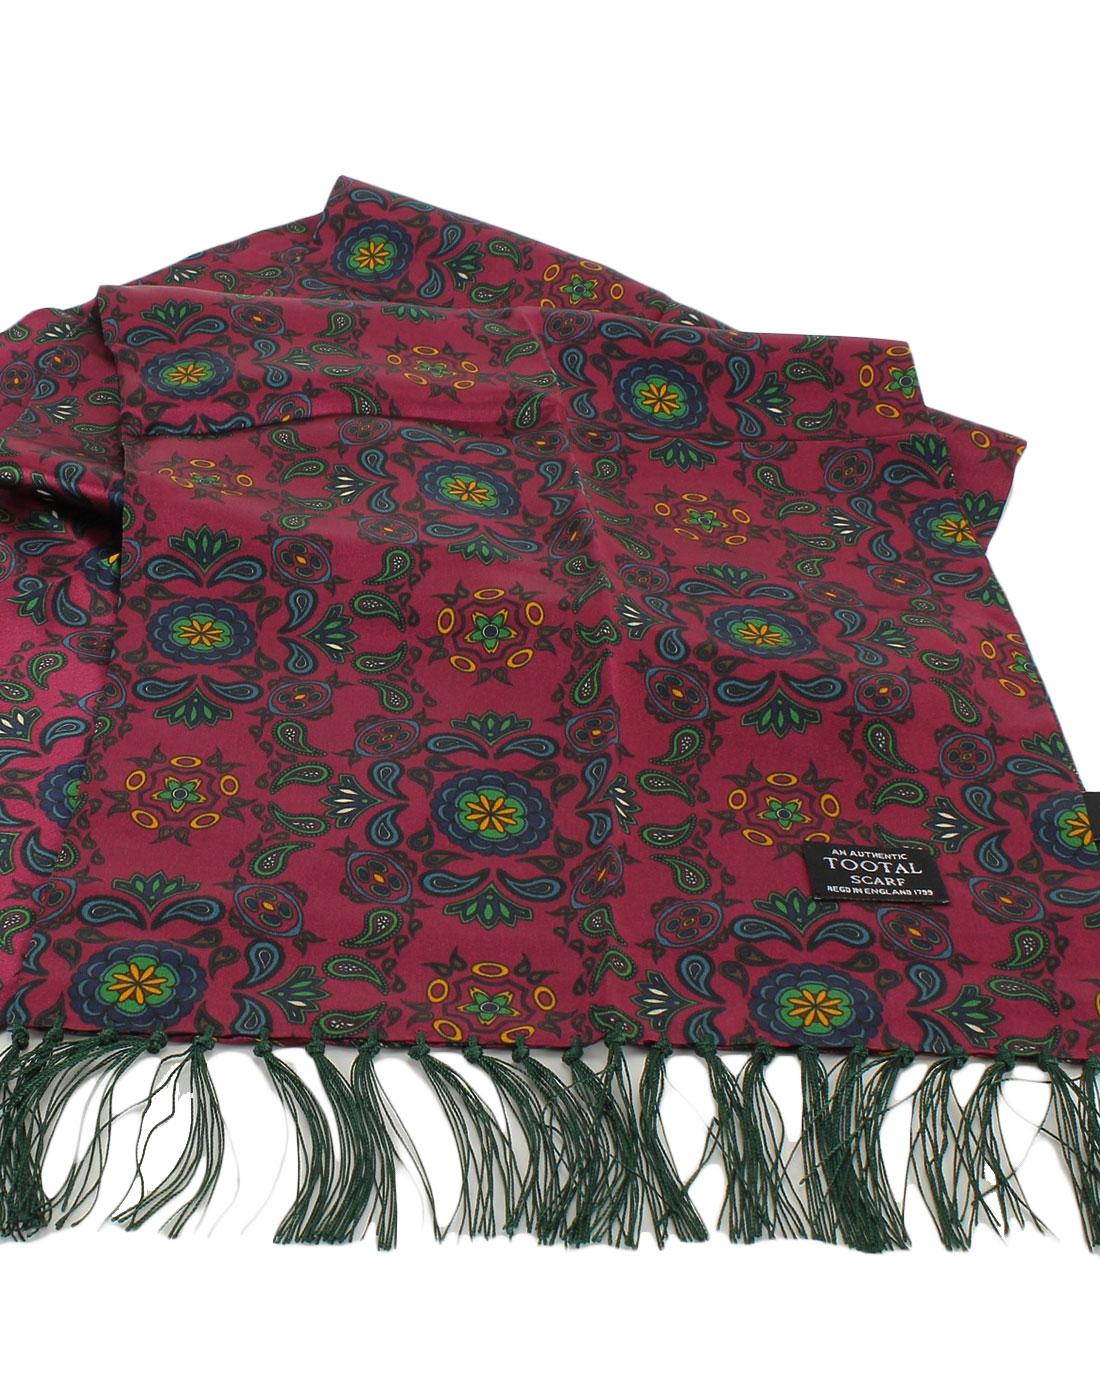 TOOTAL 60s Retro Mod Paisley Silk Scarf in Oxblood Paisley